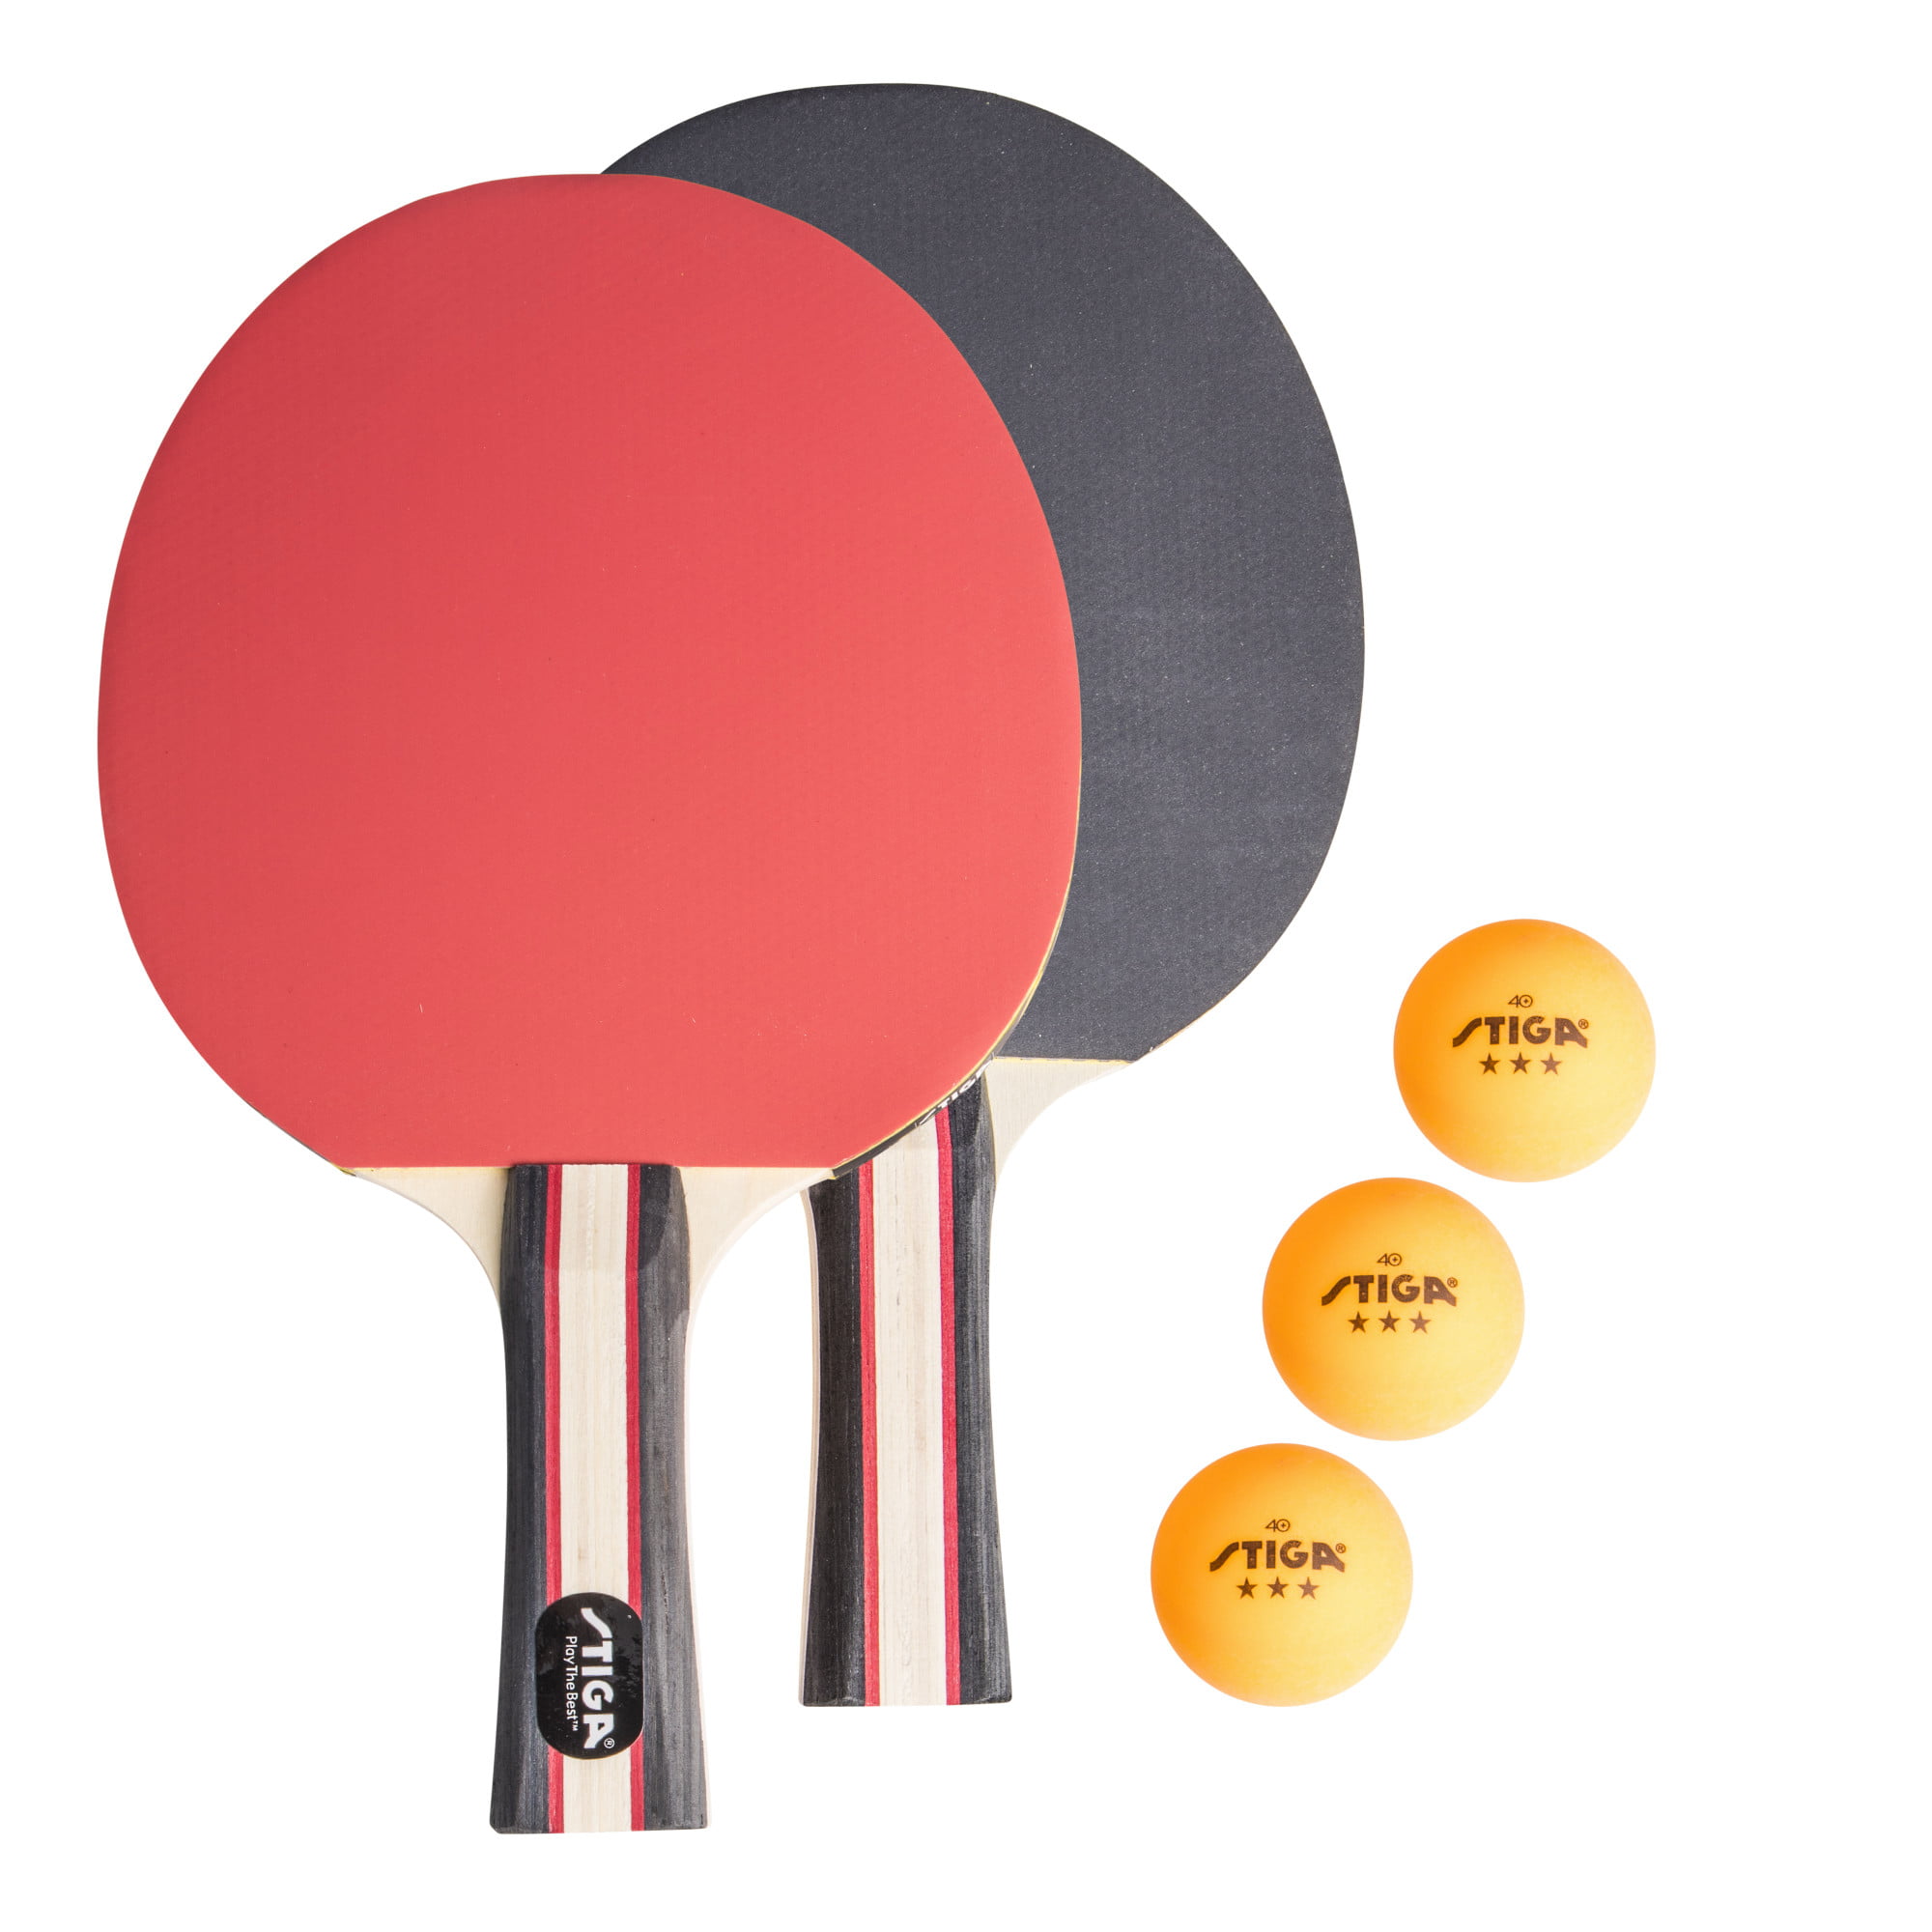 Killerspin JET SET 2 Table Tennis Set with 2 Paddles and 3 Balls 